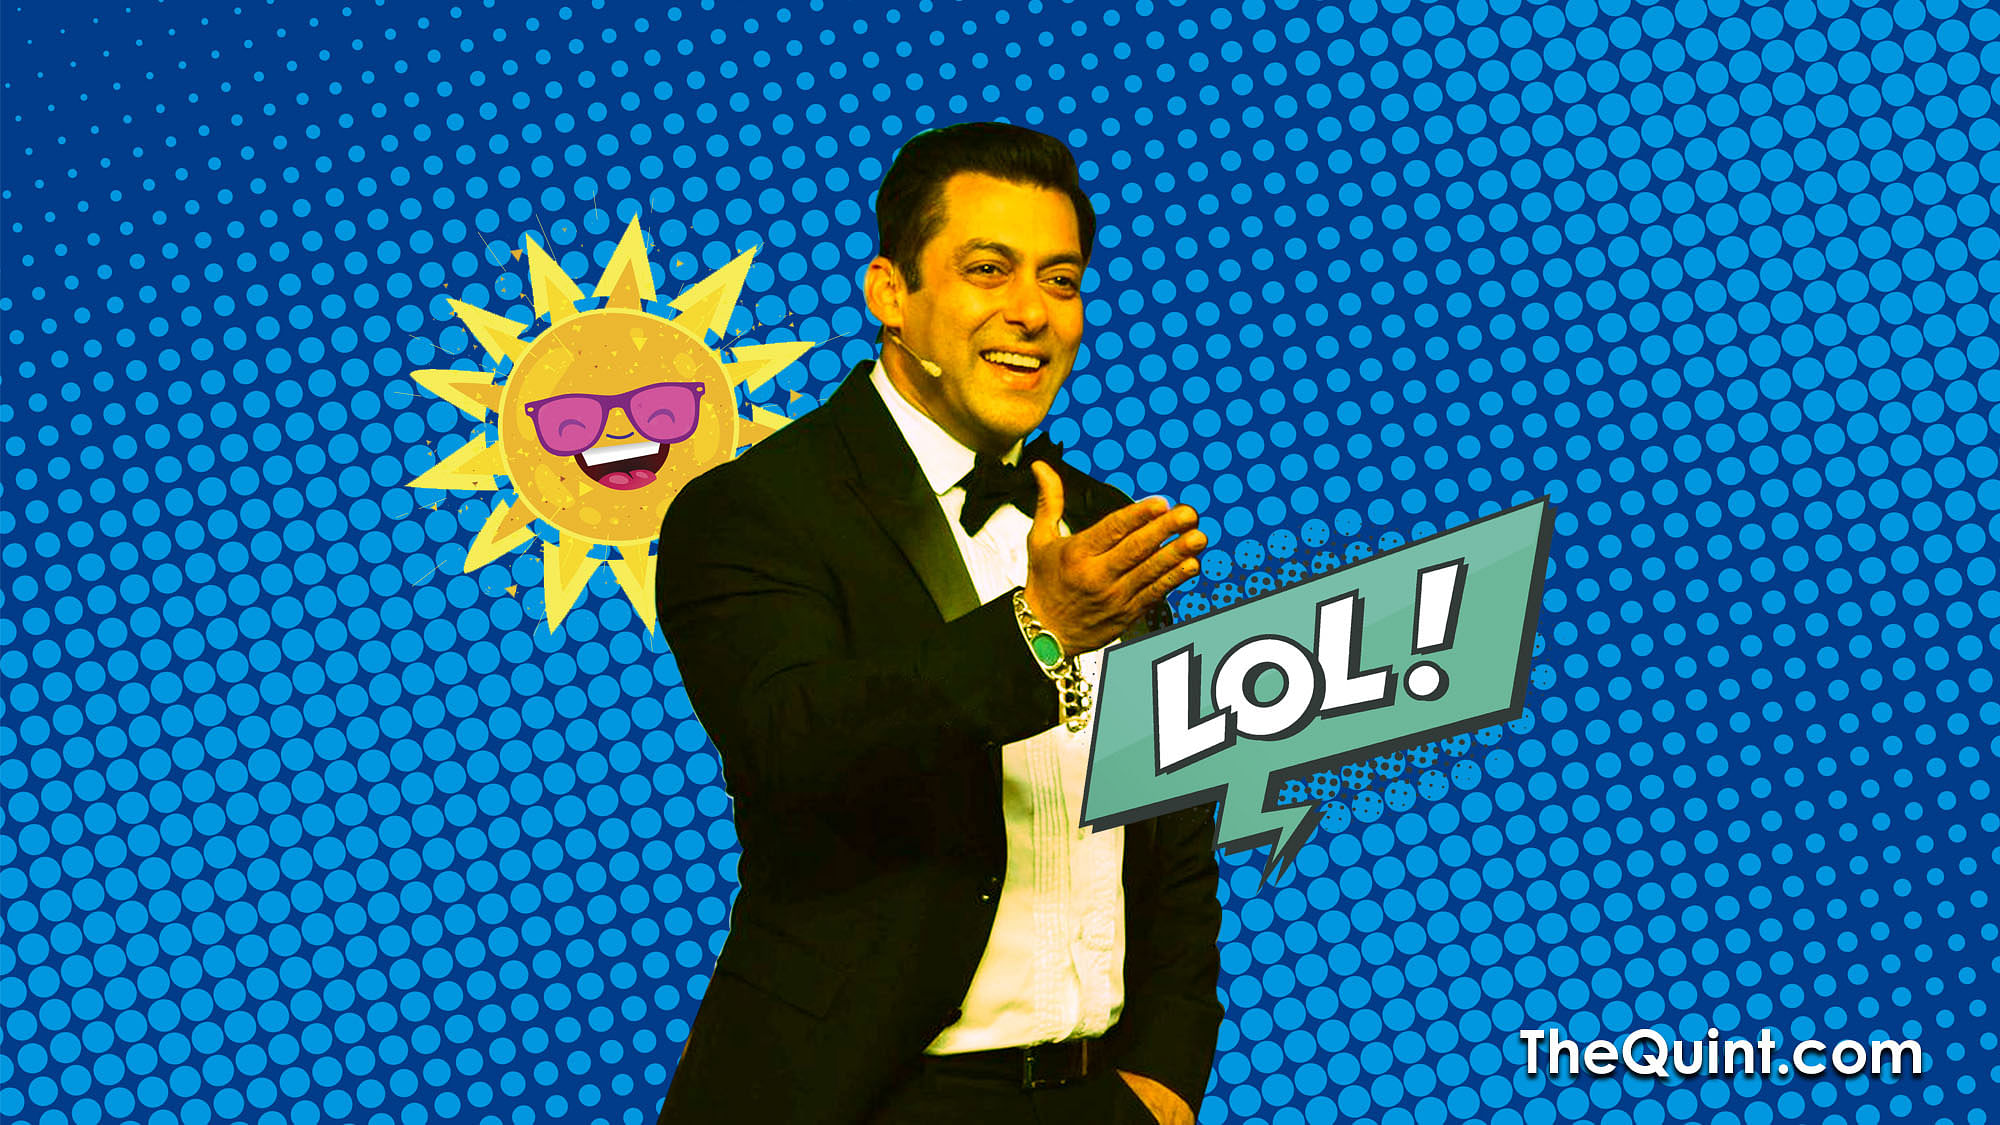 Waiting for Tubelight like a true Salman Khan fan? Meanwhile, take our quiz and try to guess his laughter from the options. (Design: Aaqib Raza Khan/<b>The Quint</b>)